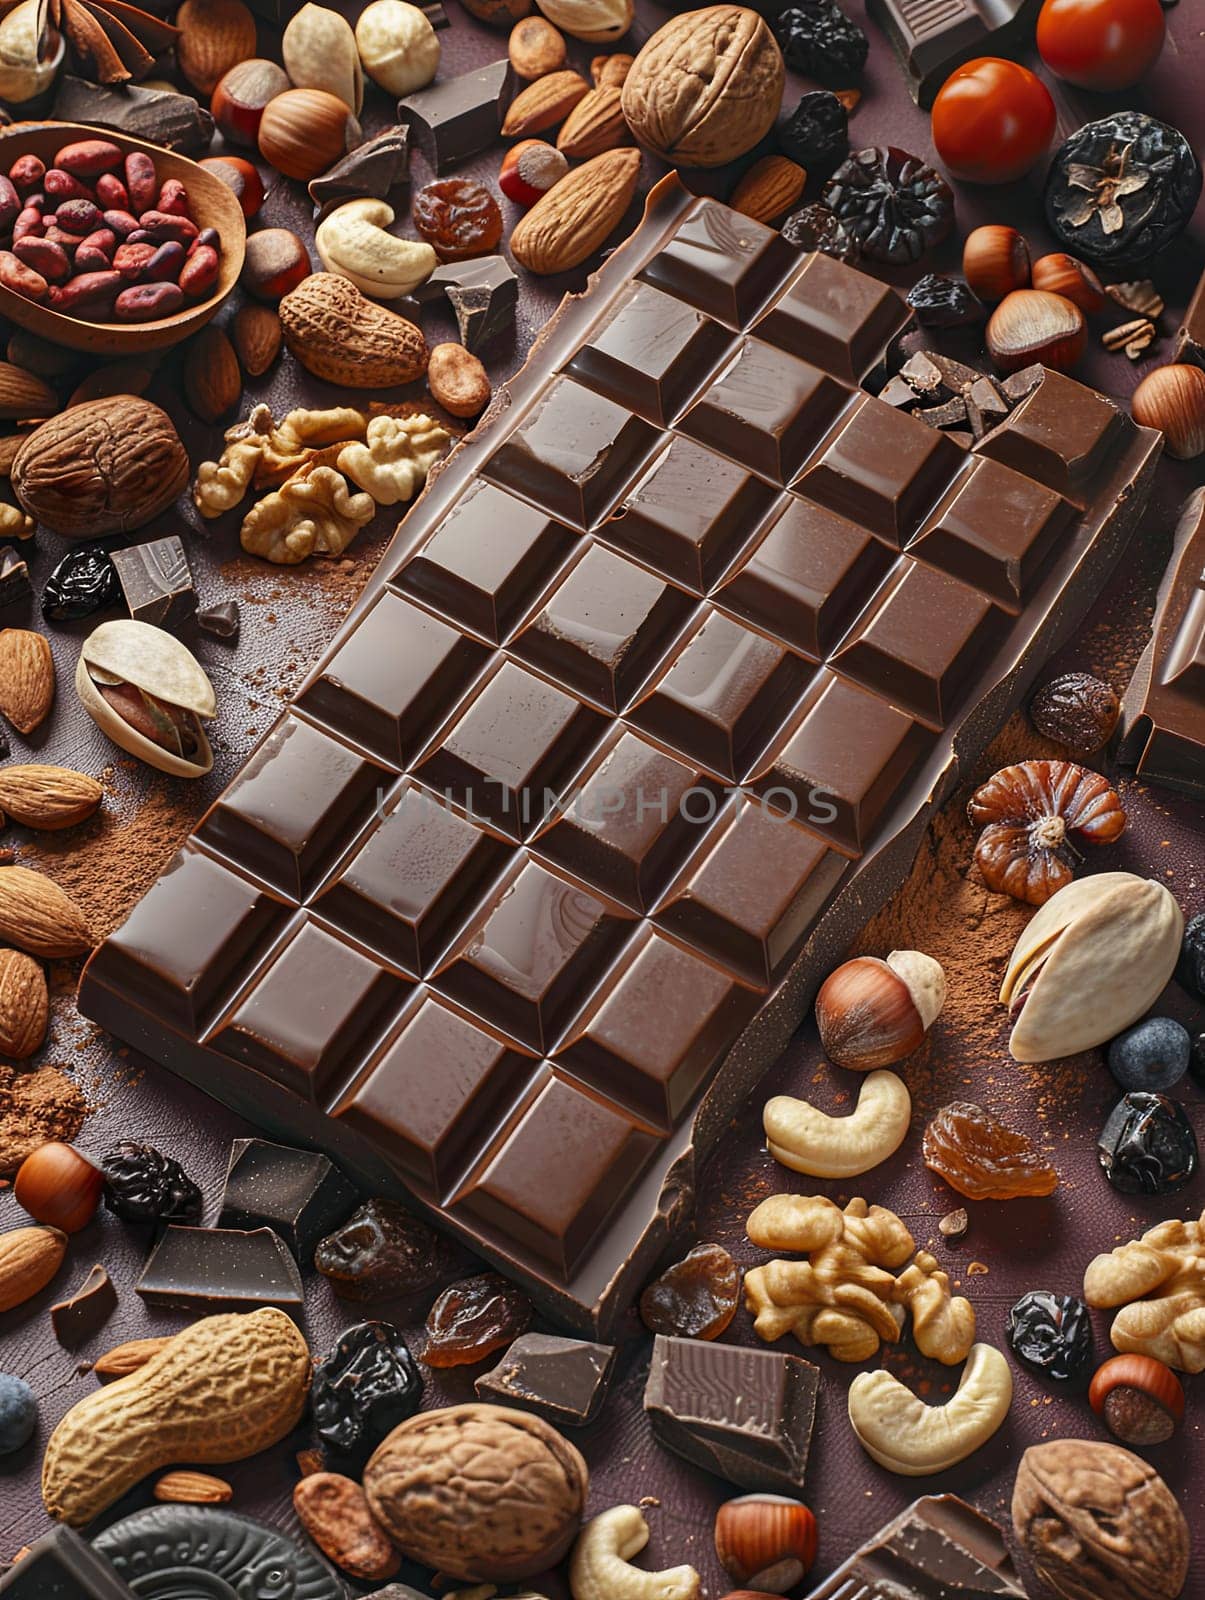 A chocolate bar sits surrounded by nuts and chocolate pieces, showcasing rich textures and natural ingredients.